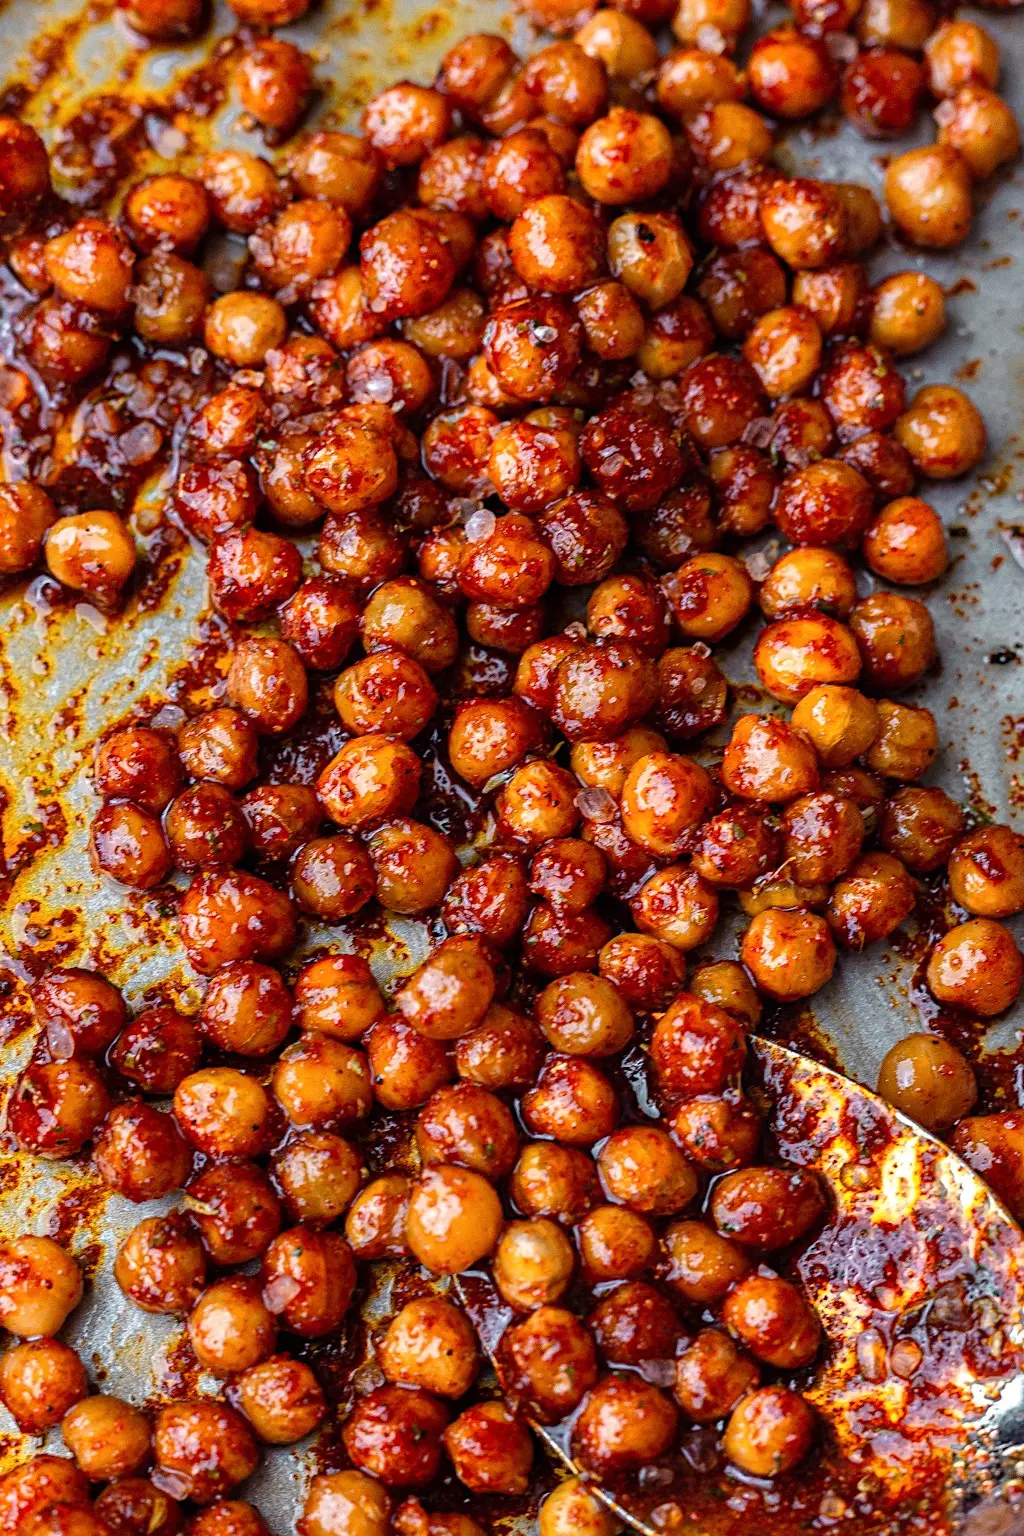 buy smoked chickpeas - Can you buy non canned chickpeas